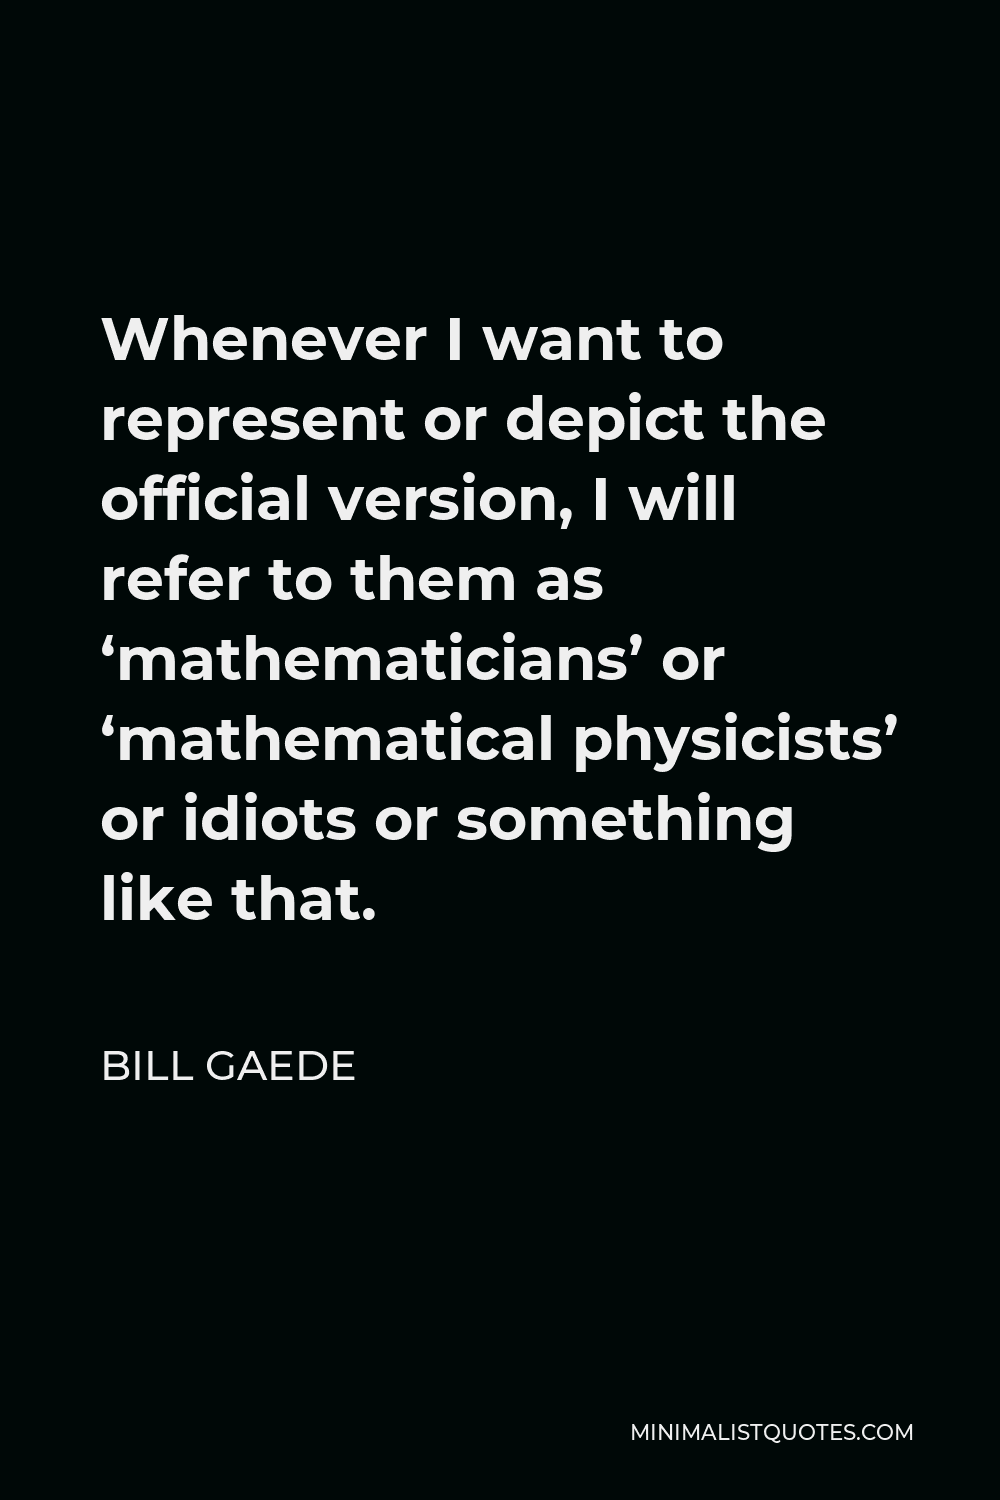 Bill Gaede Quote - Whenever I want to represent or depict the official version, I will refer to them as ‘mathematicians’ or ‘mathematical physicists’ or idiots or something like that.